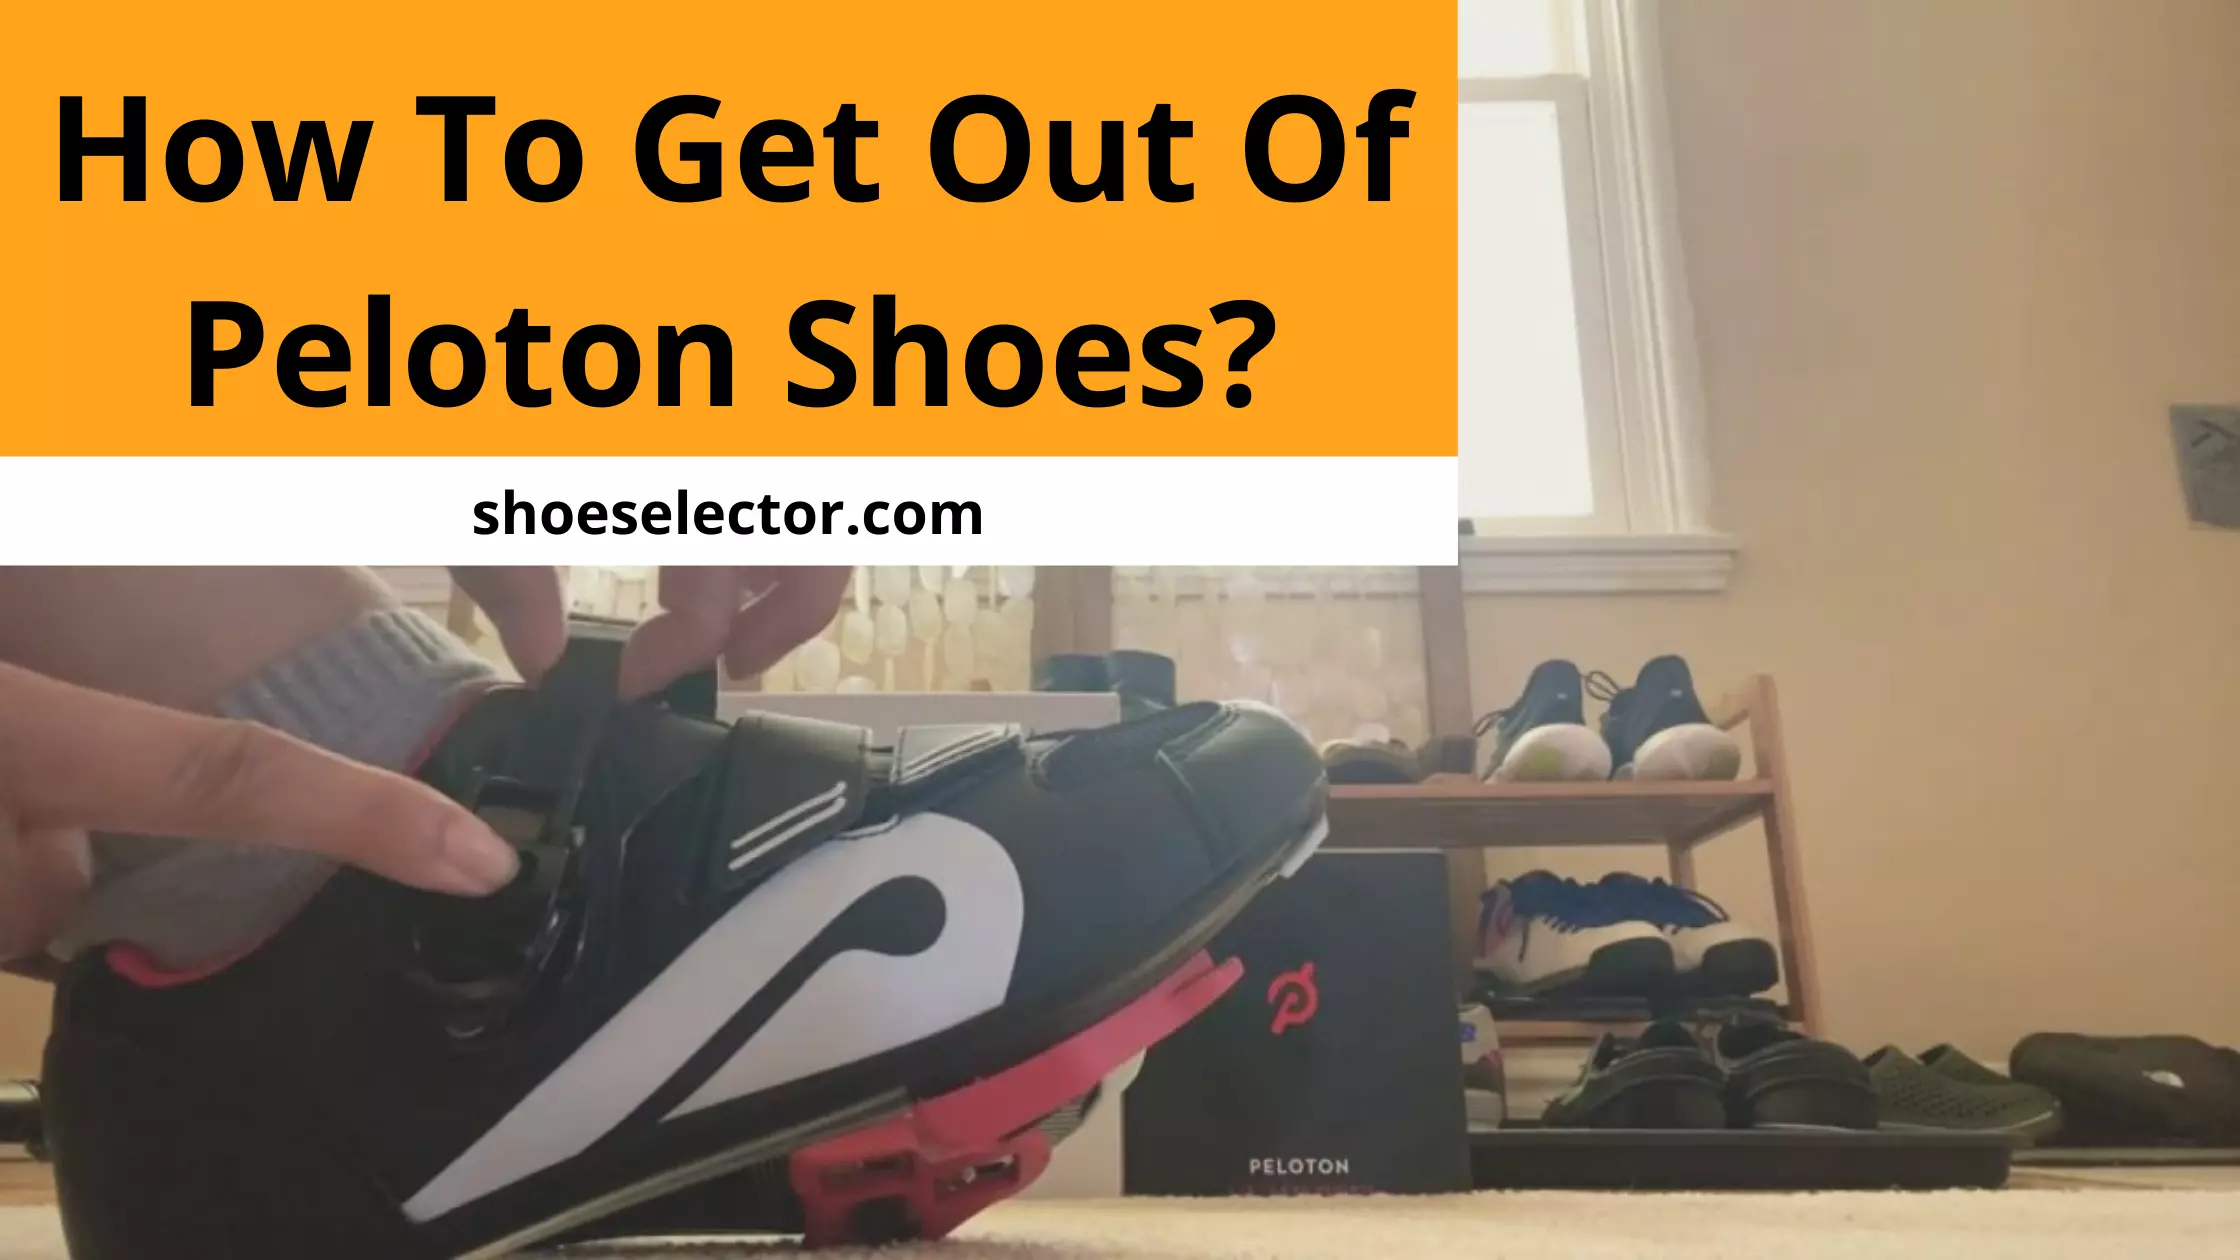 How To Get Out Of Peloton Shoes? - Effective Ways